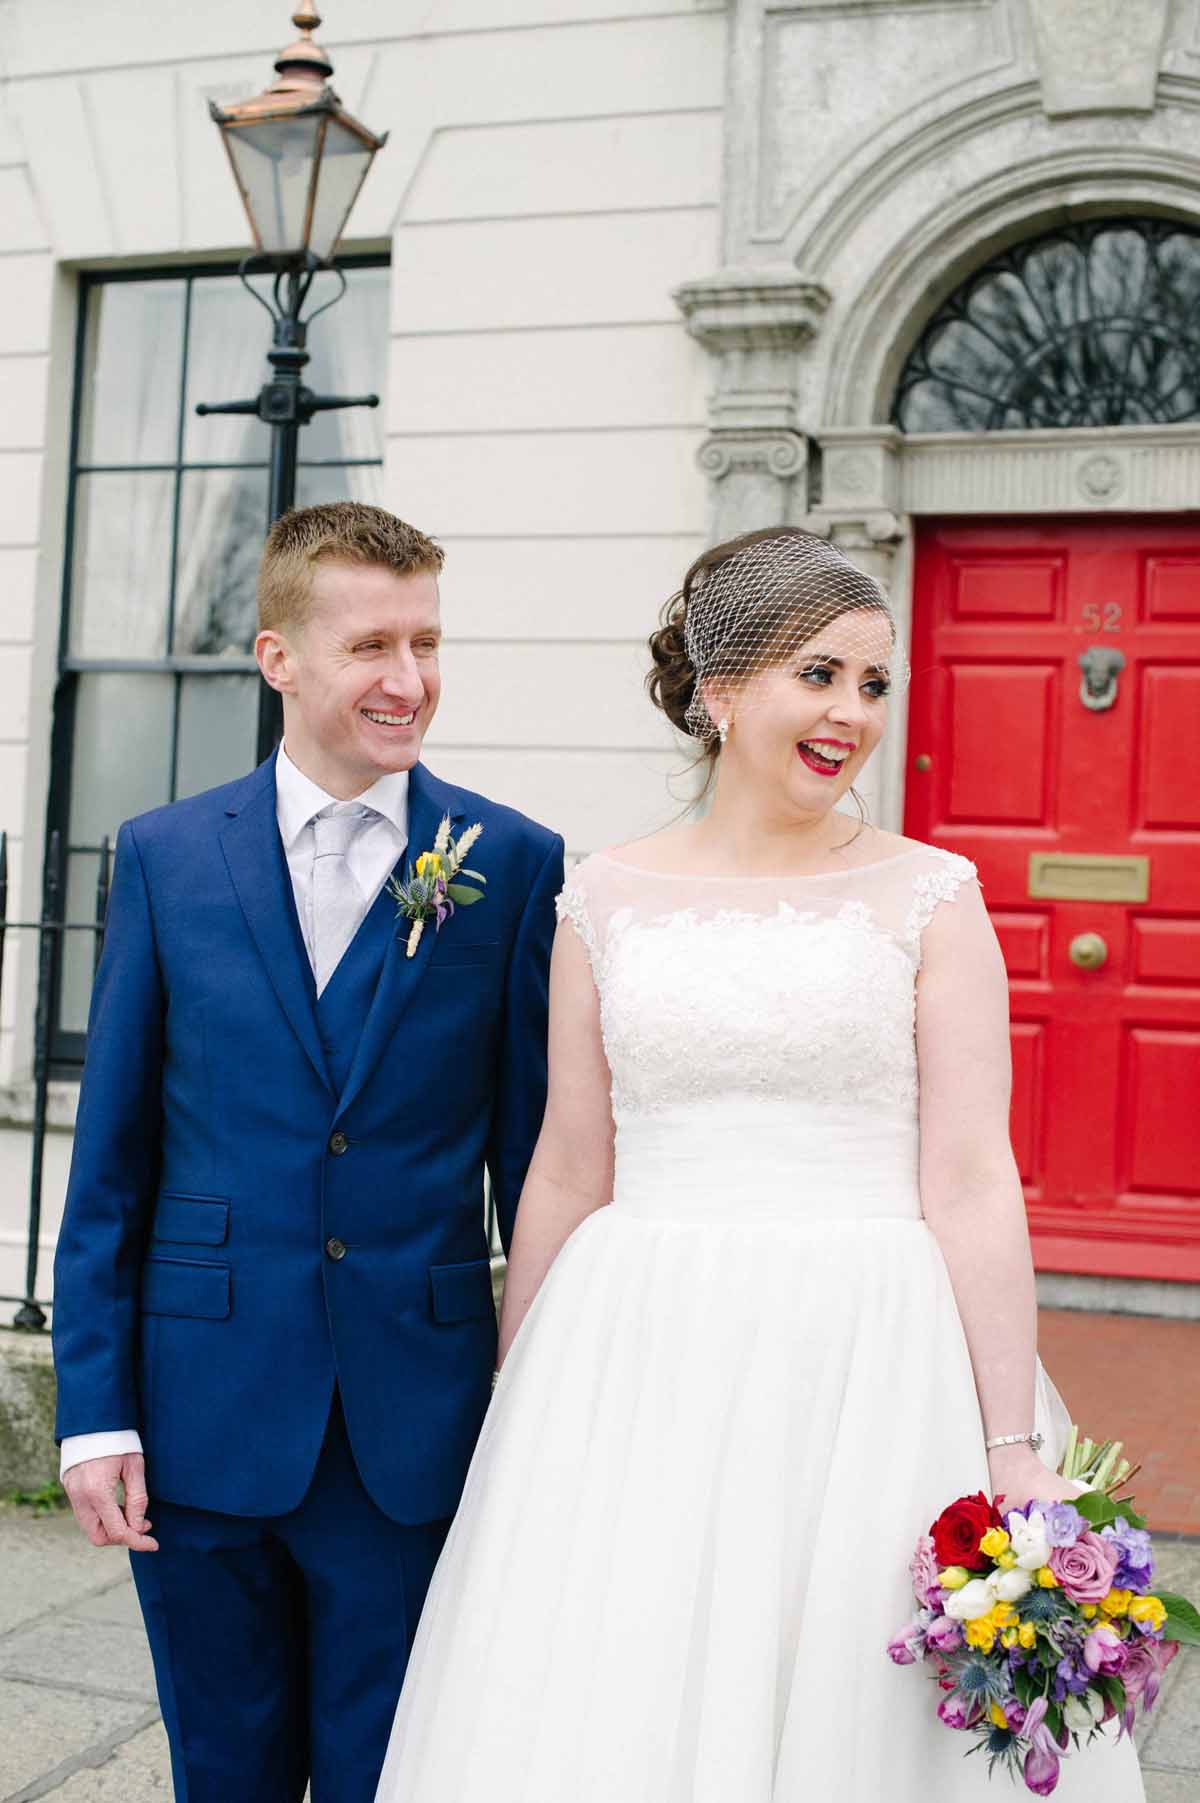 Registry Office Wedding Picture in Dublin City centre